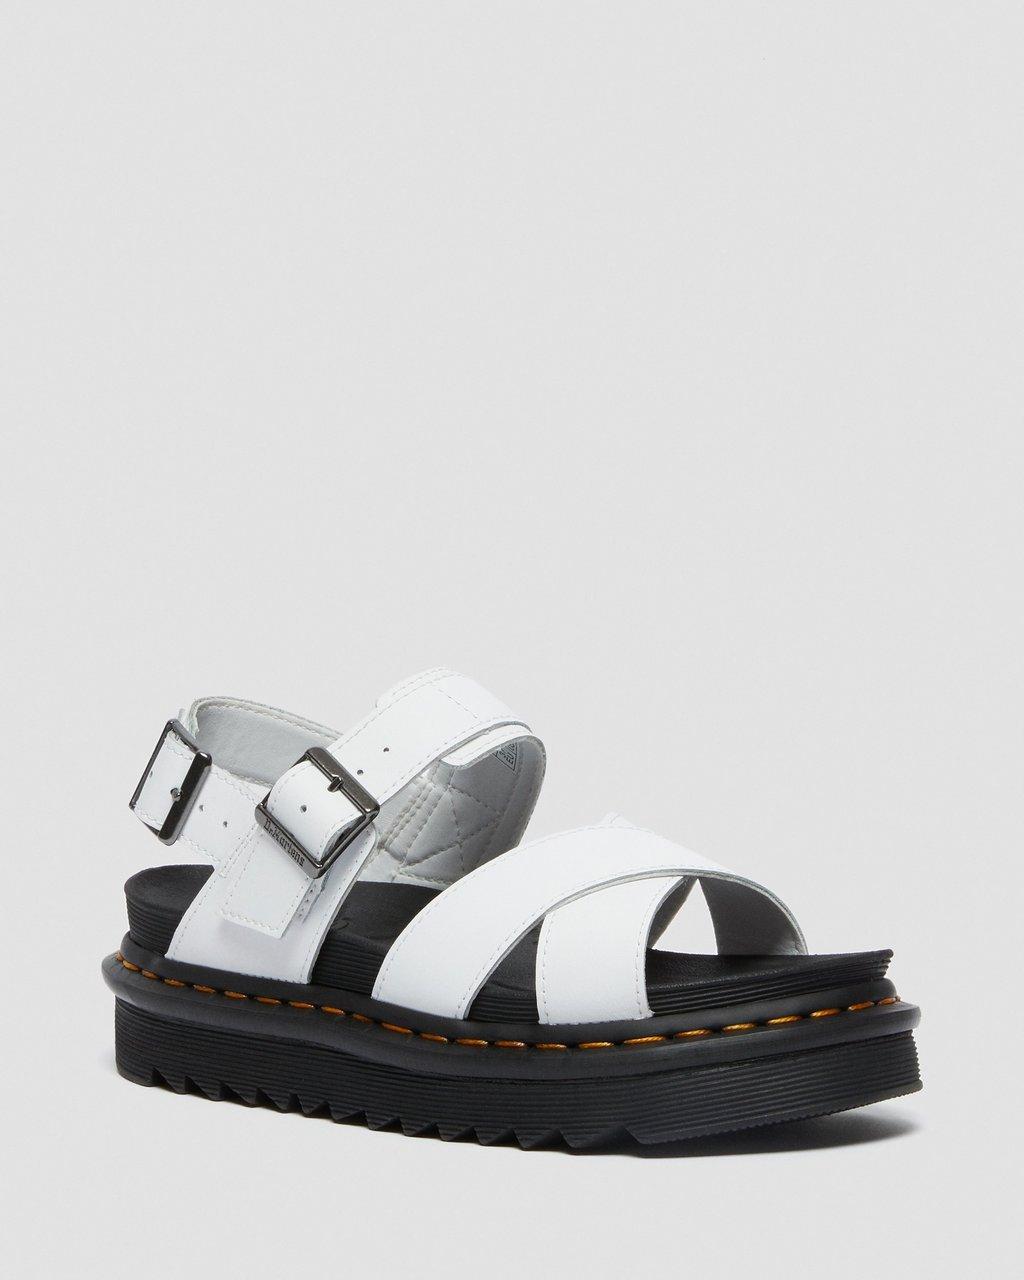 Dr. Voss Leather Strap Sandals in Black | Lyst